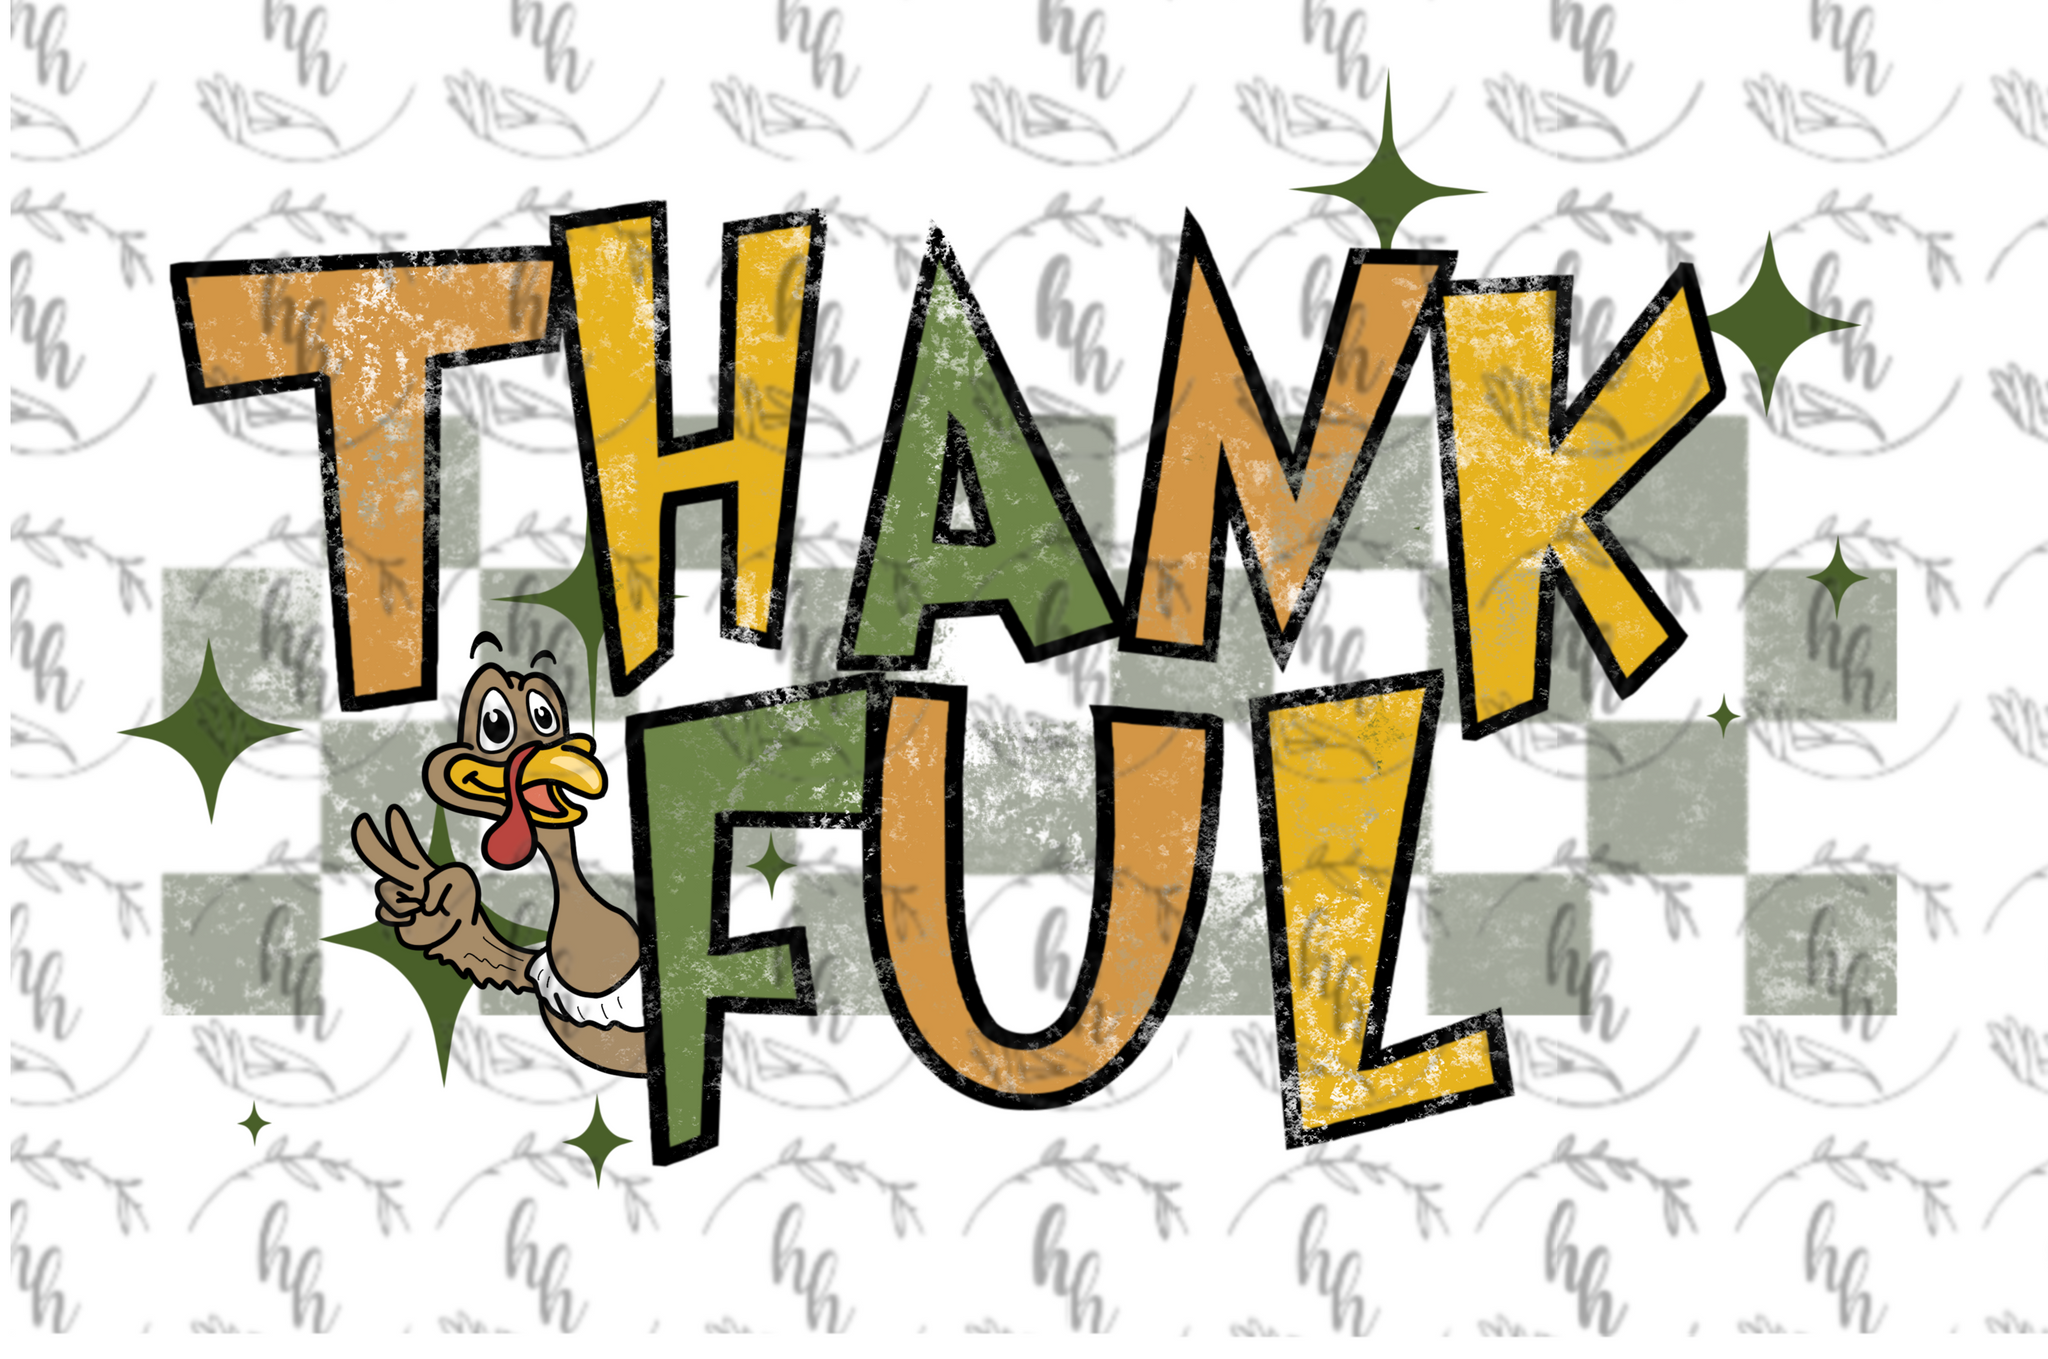 Checkered Thankful PNG - Digital Download